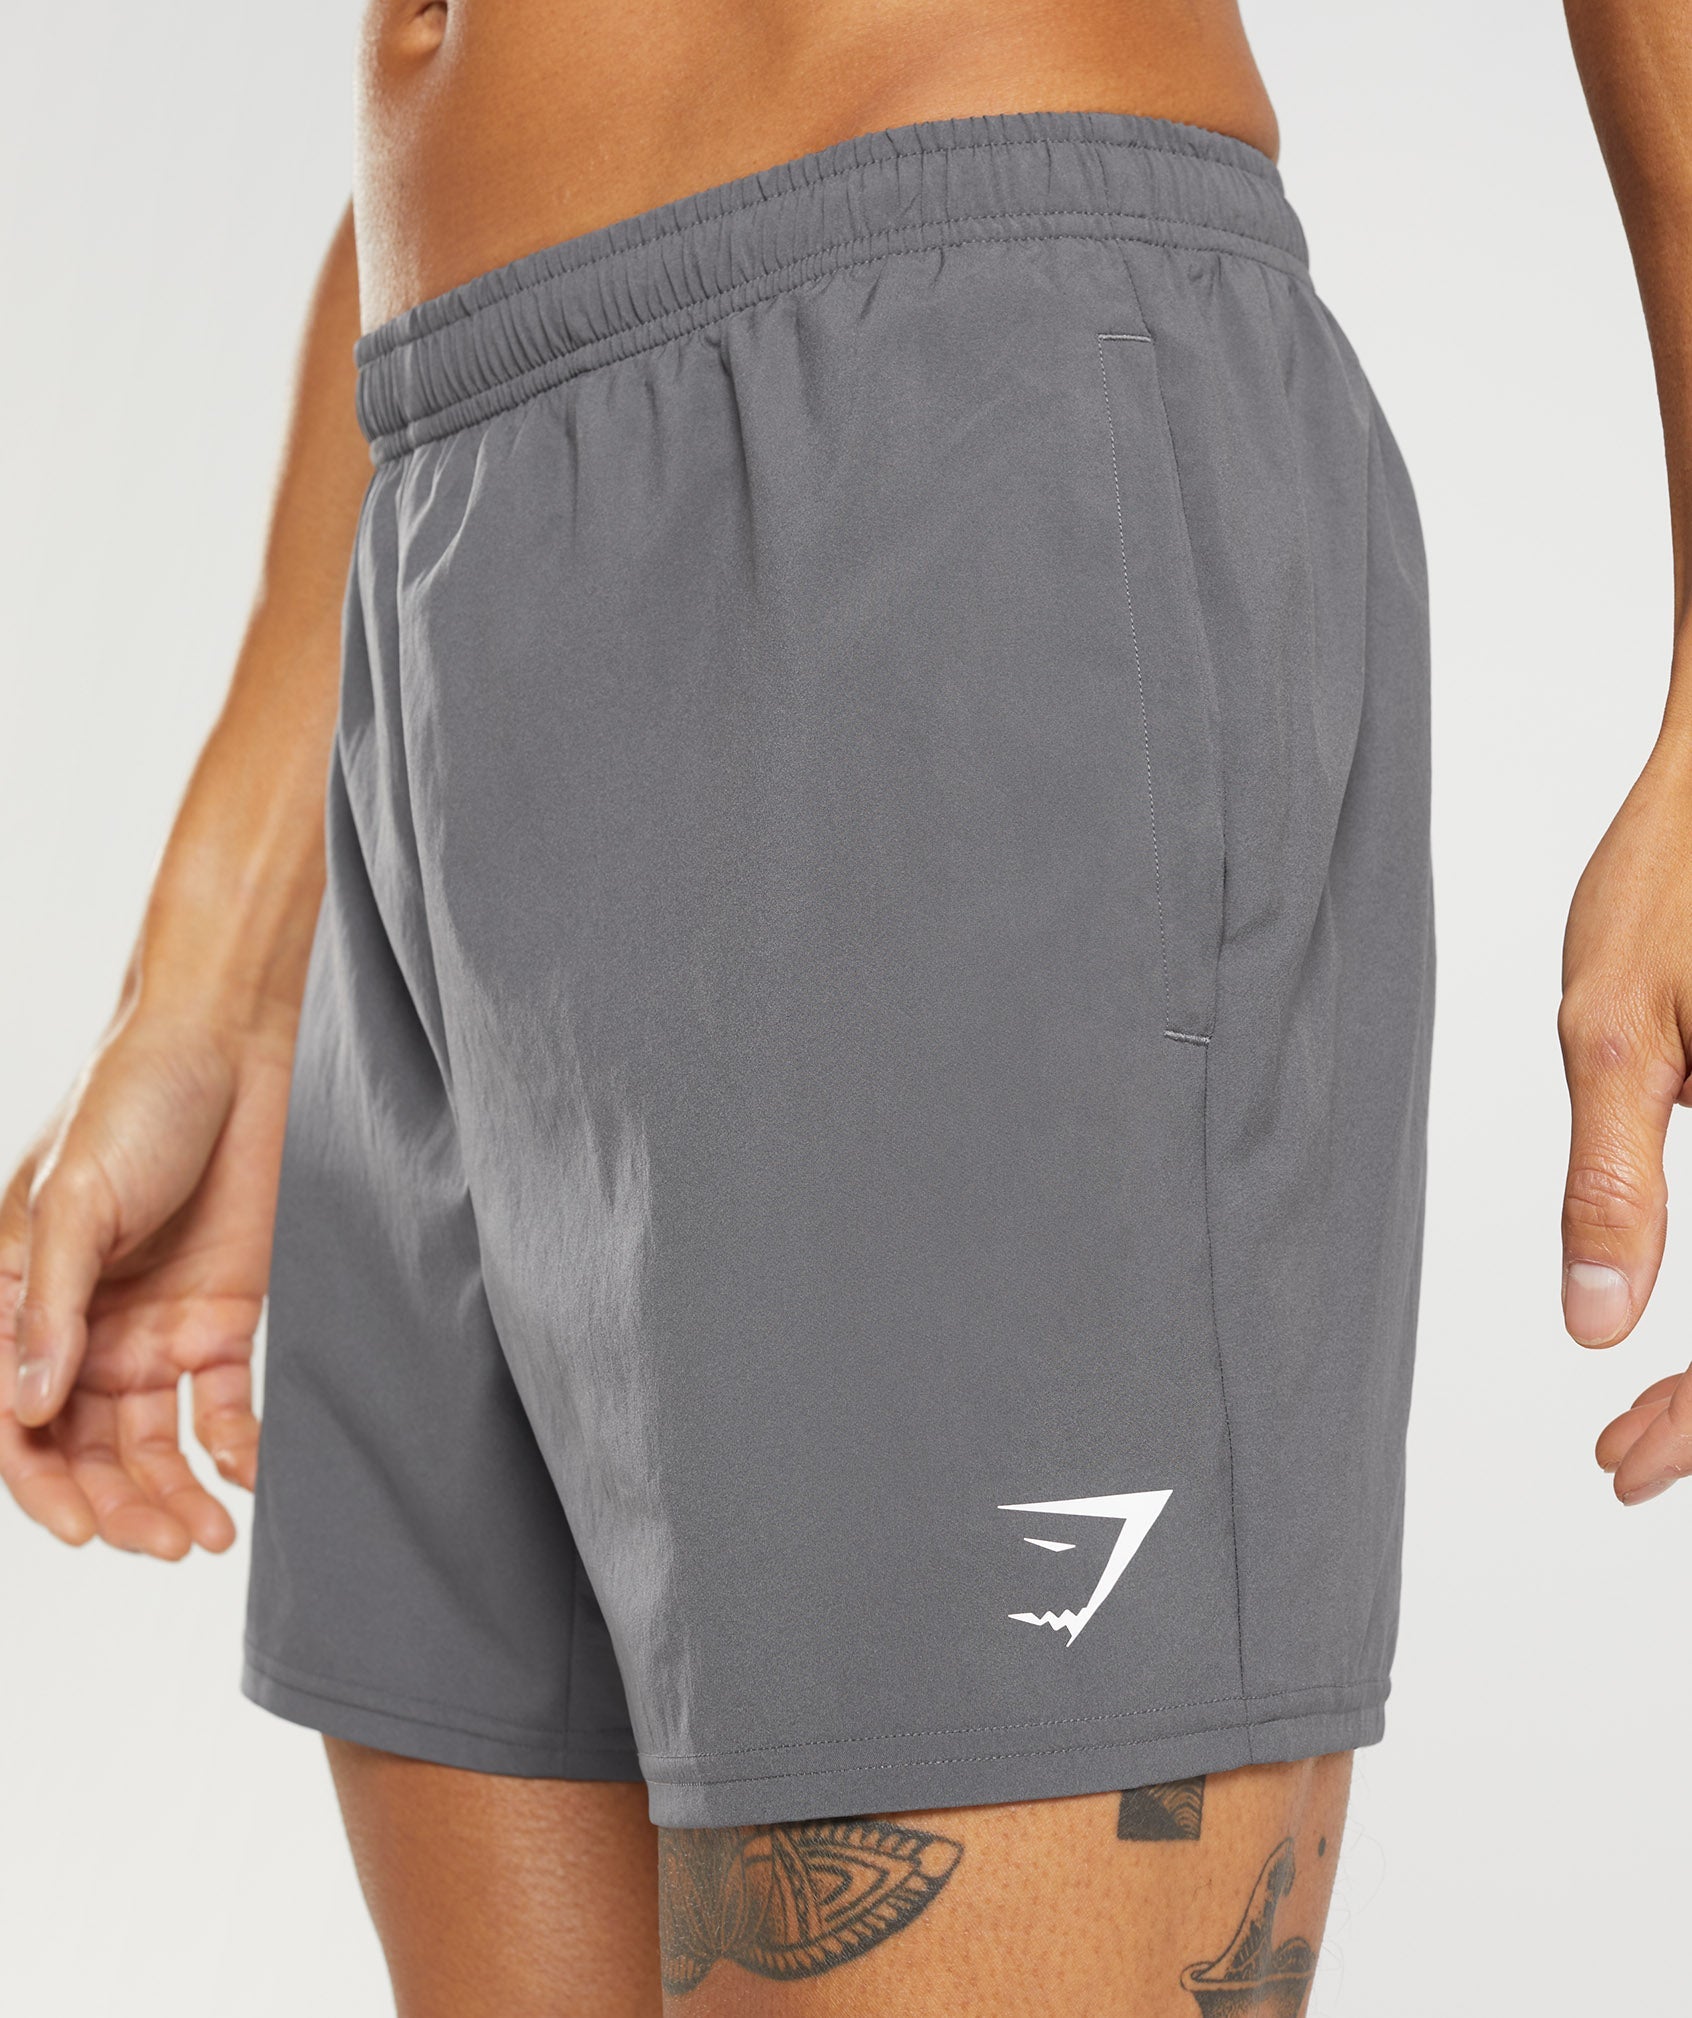 Arrival 5" Shorts in Silhouette Grey - view 4